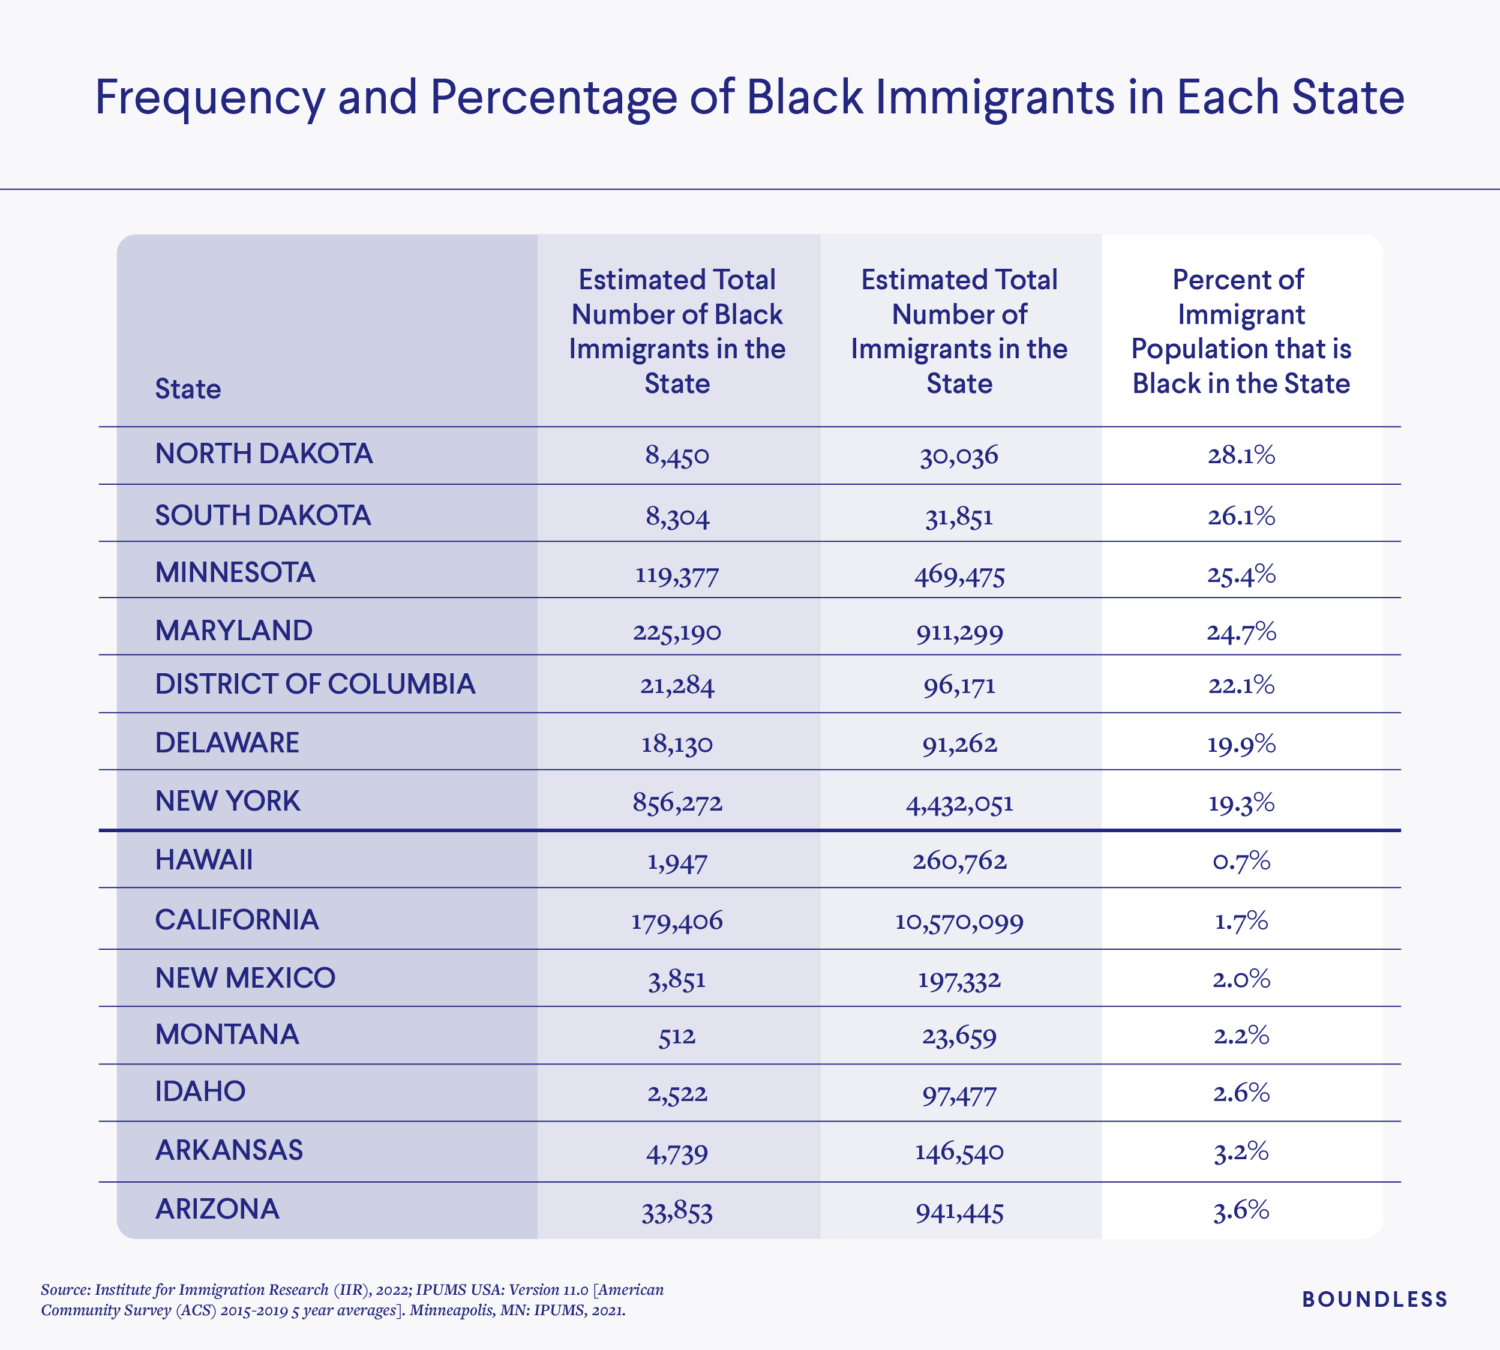 Frequency and Percentage of Black Immigrants in Each U.S. State